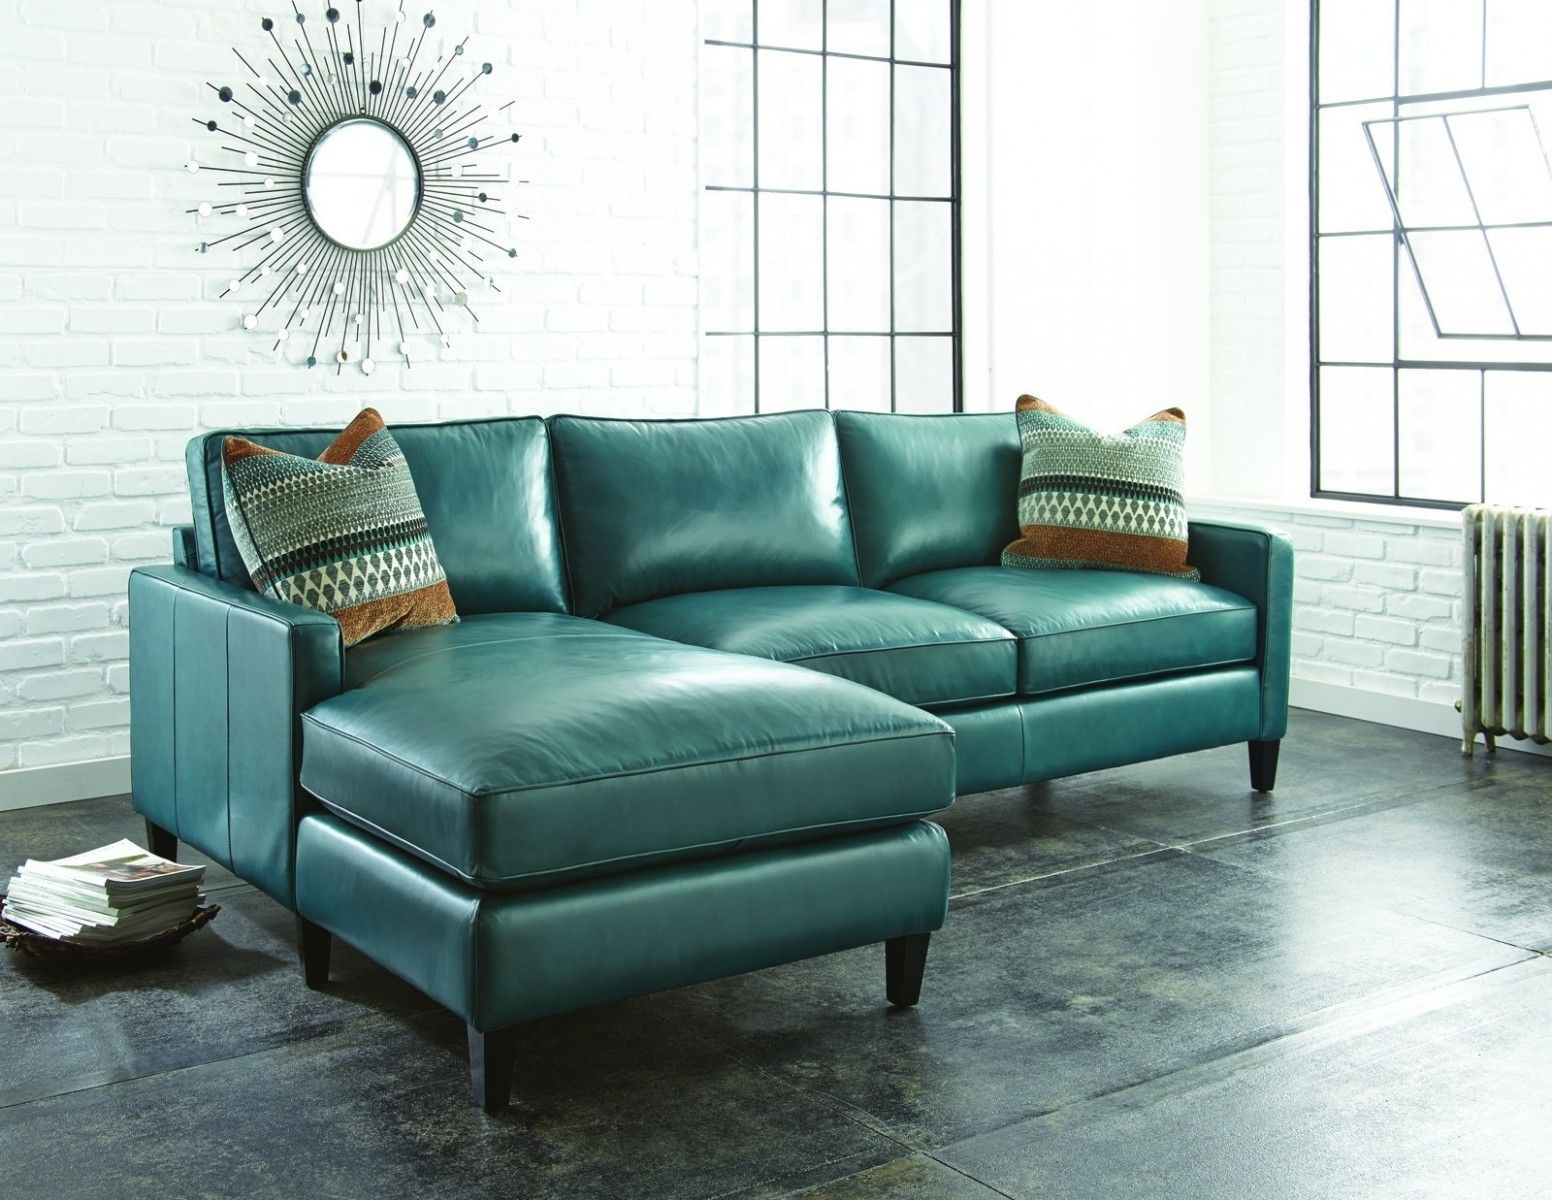 Aqua Green Leather Sofa – The Versatility And Allure Of Leather Inside Aqua Sofas (View 6 of 10)